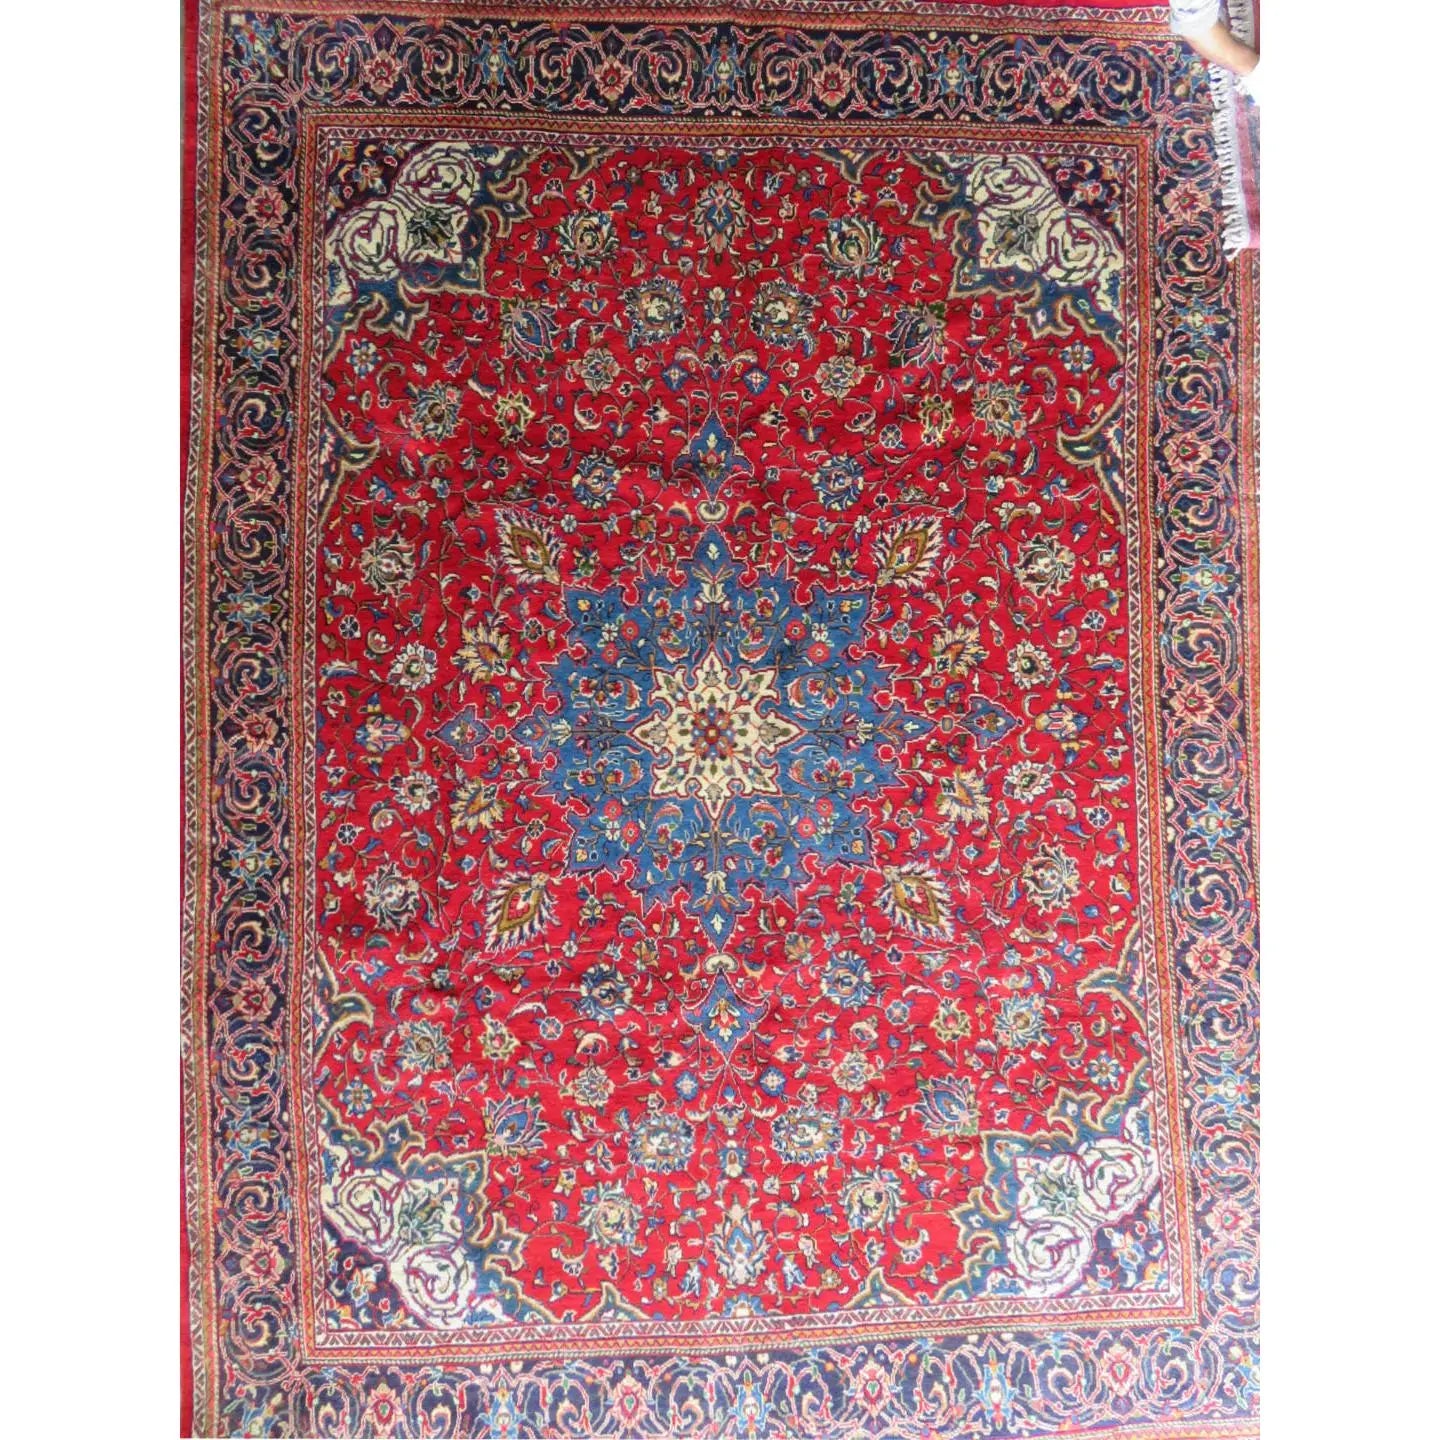 Hand-Knotted Persian Wool Rug _ Luxurious Vintage Design, 13'5" x 9'8", Artisan Crafted